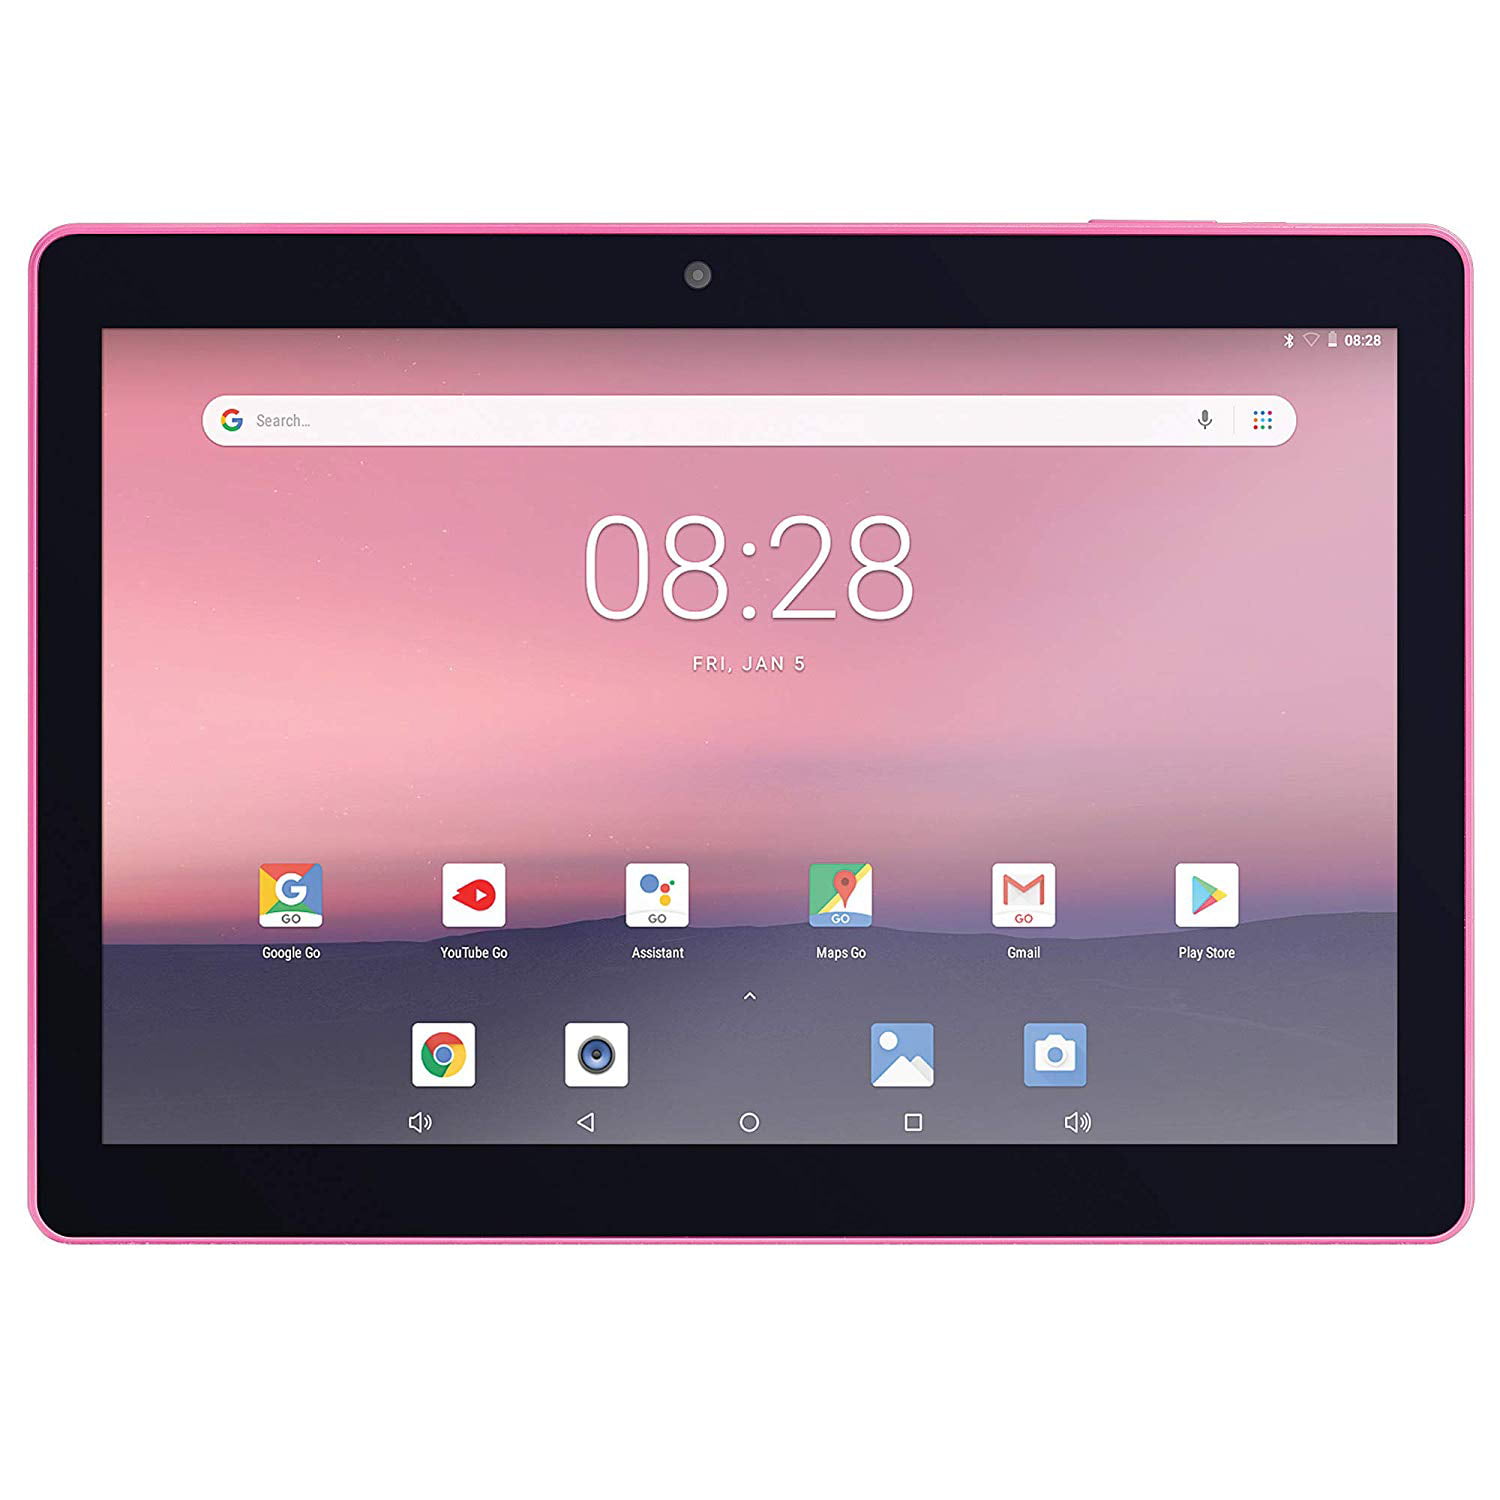 EVOO 10" EV-A-101-3-PK Quad Core 16GB Storage Android 8.1 Go Edition Tablet Pink 